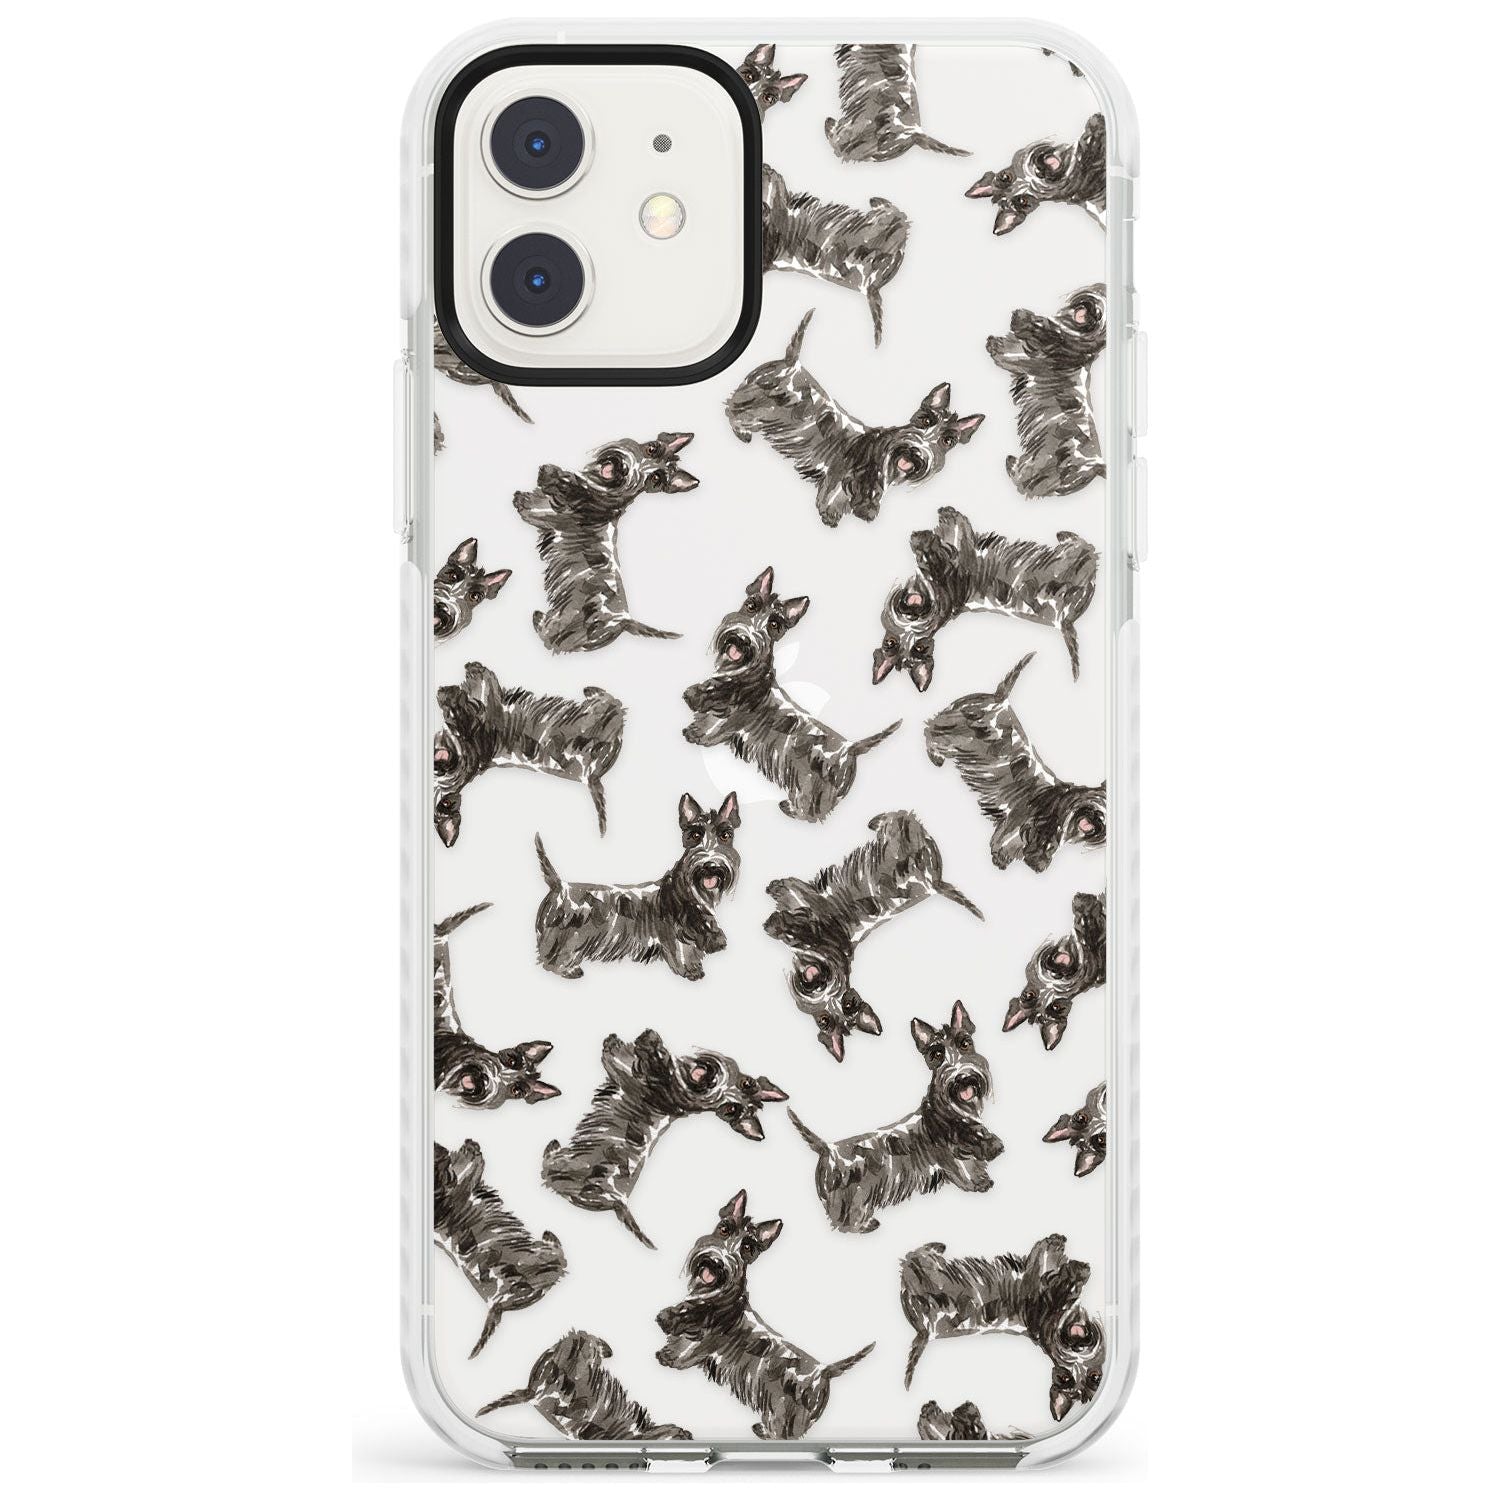 Scottish Terrier Watercolour Dog Pattern Impact Phone Case for iPhone 11